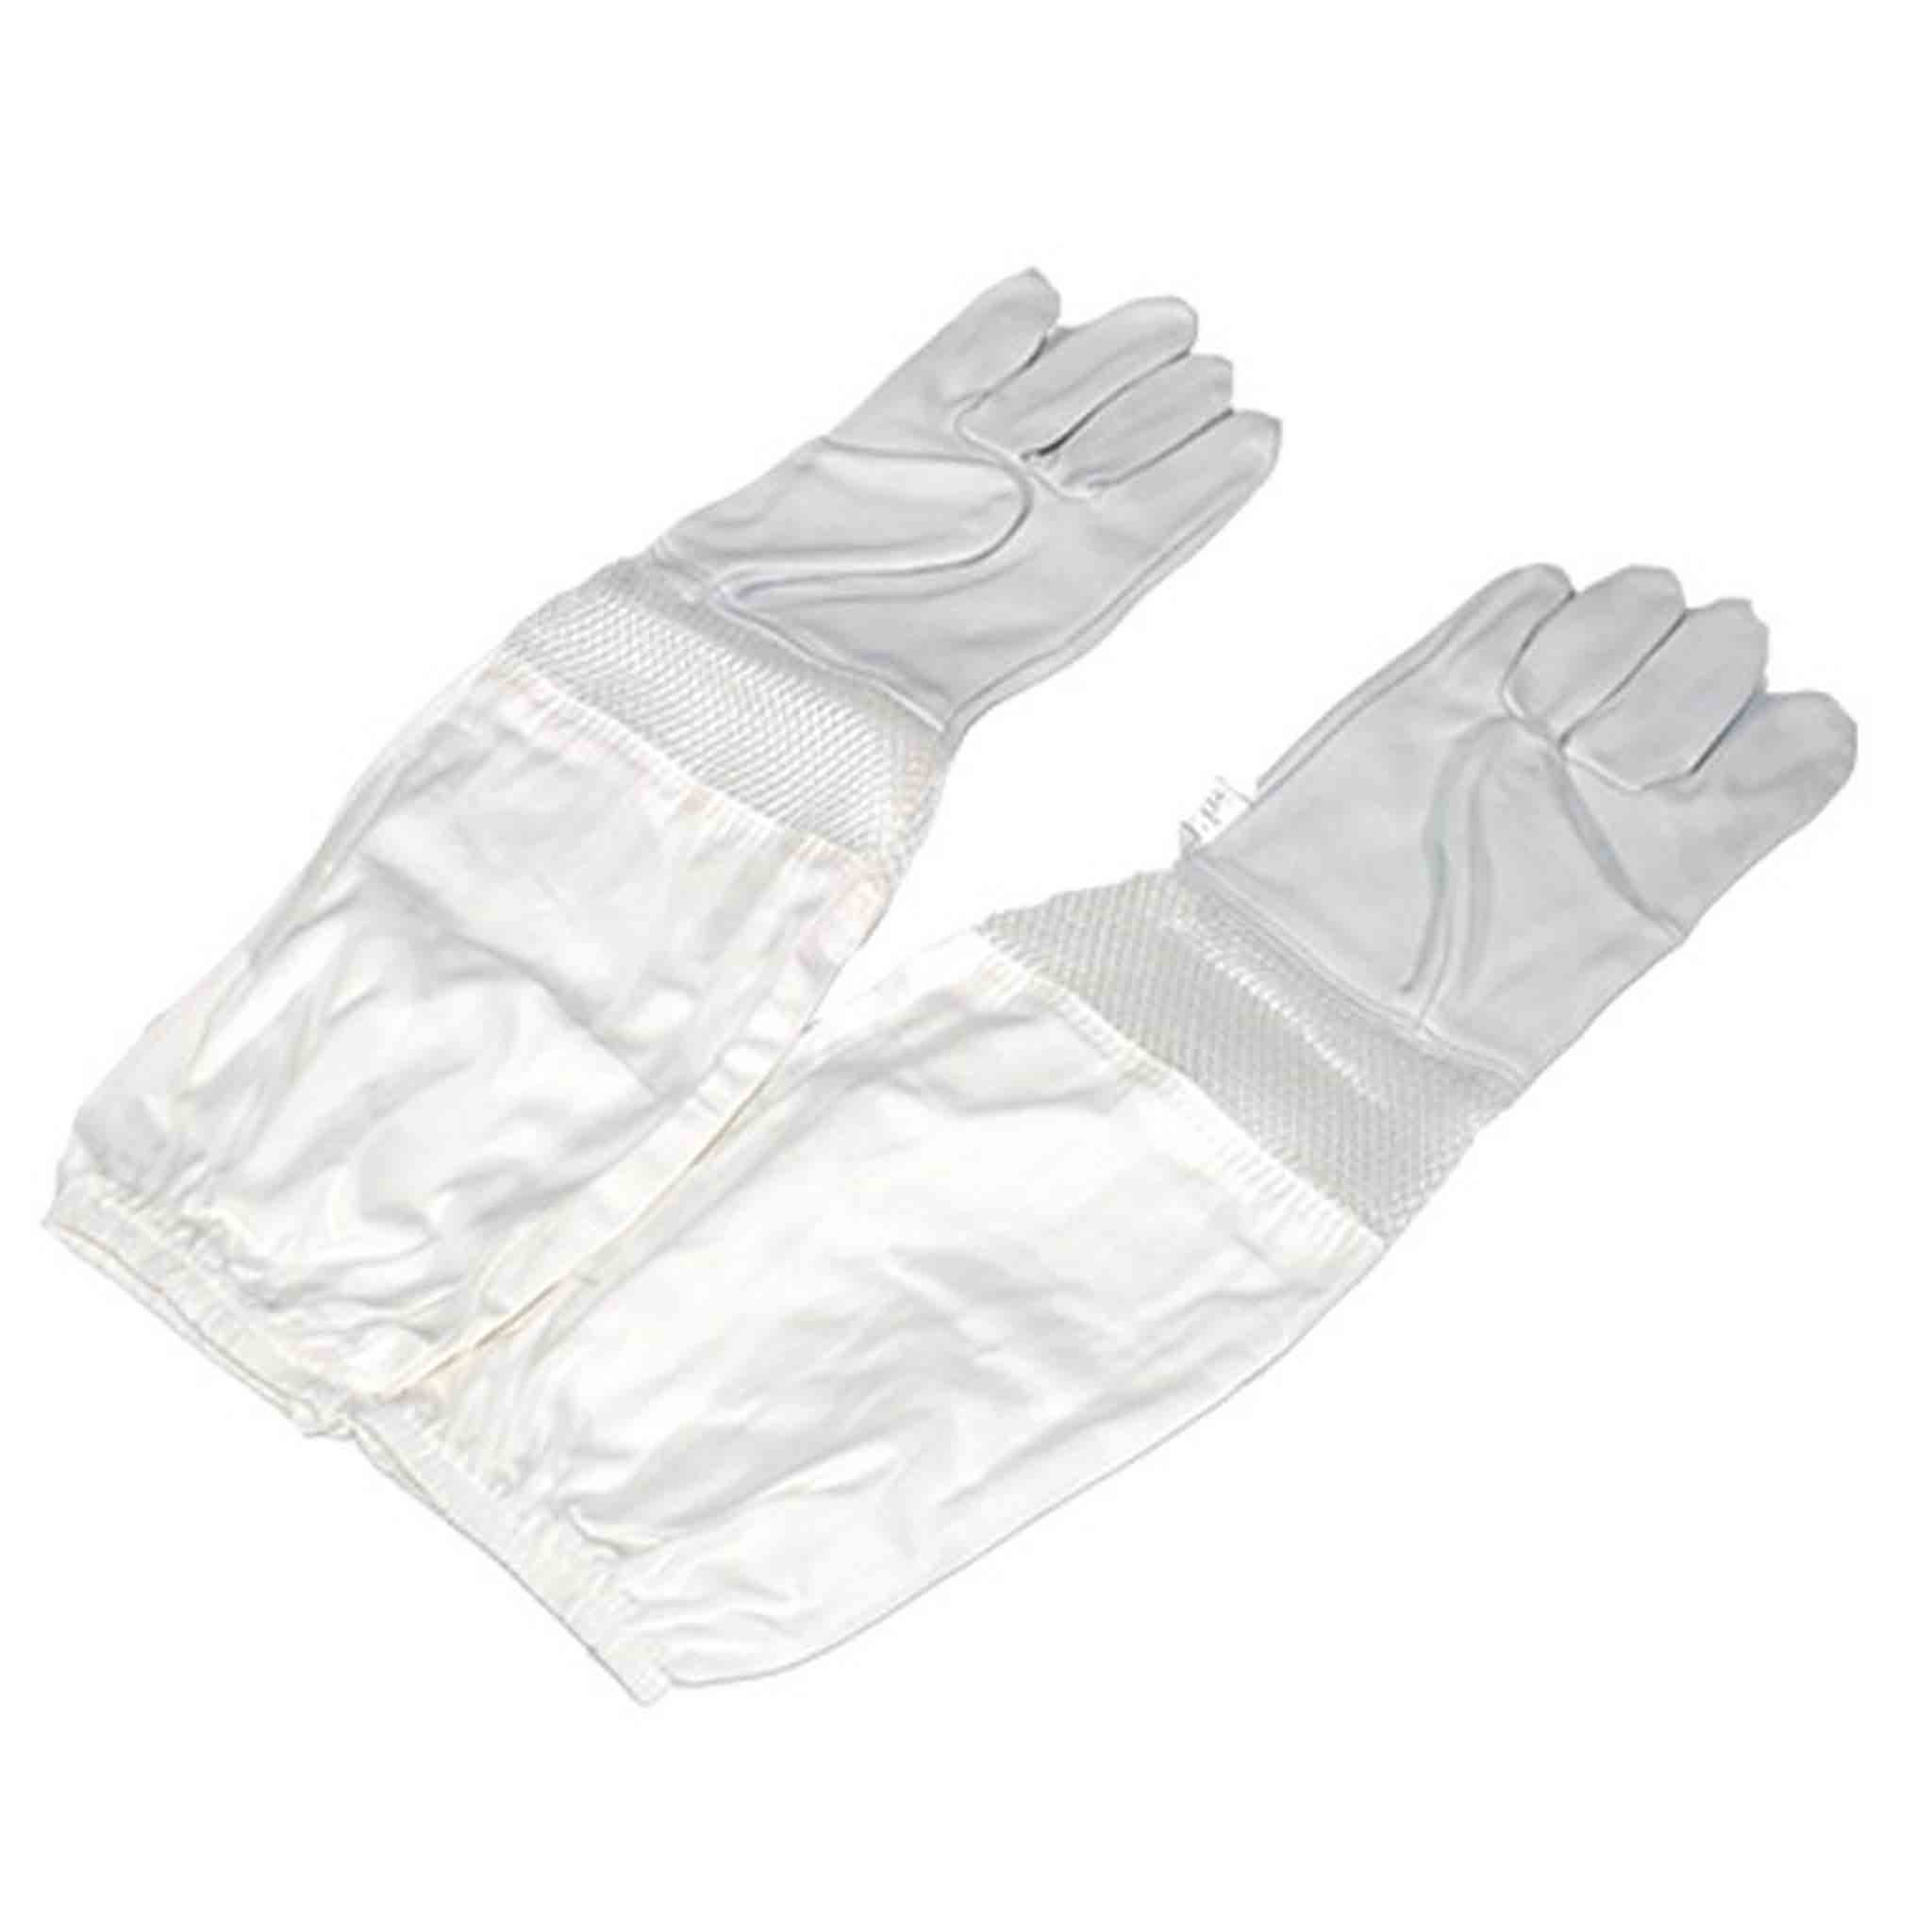 Warm Weather Beekeeping White and Yellow Goatskin Gloves - Clothing collection by Buzzbee Beekeeping Supplies